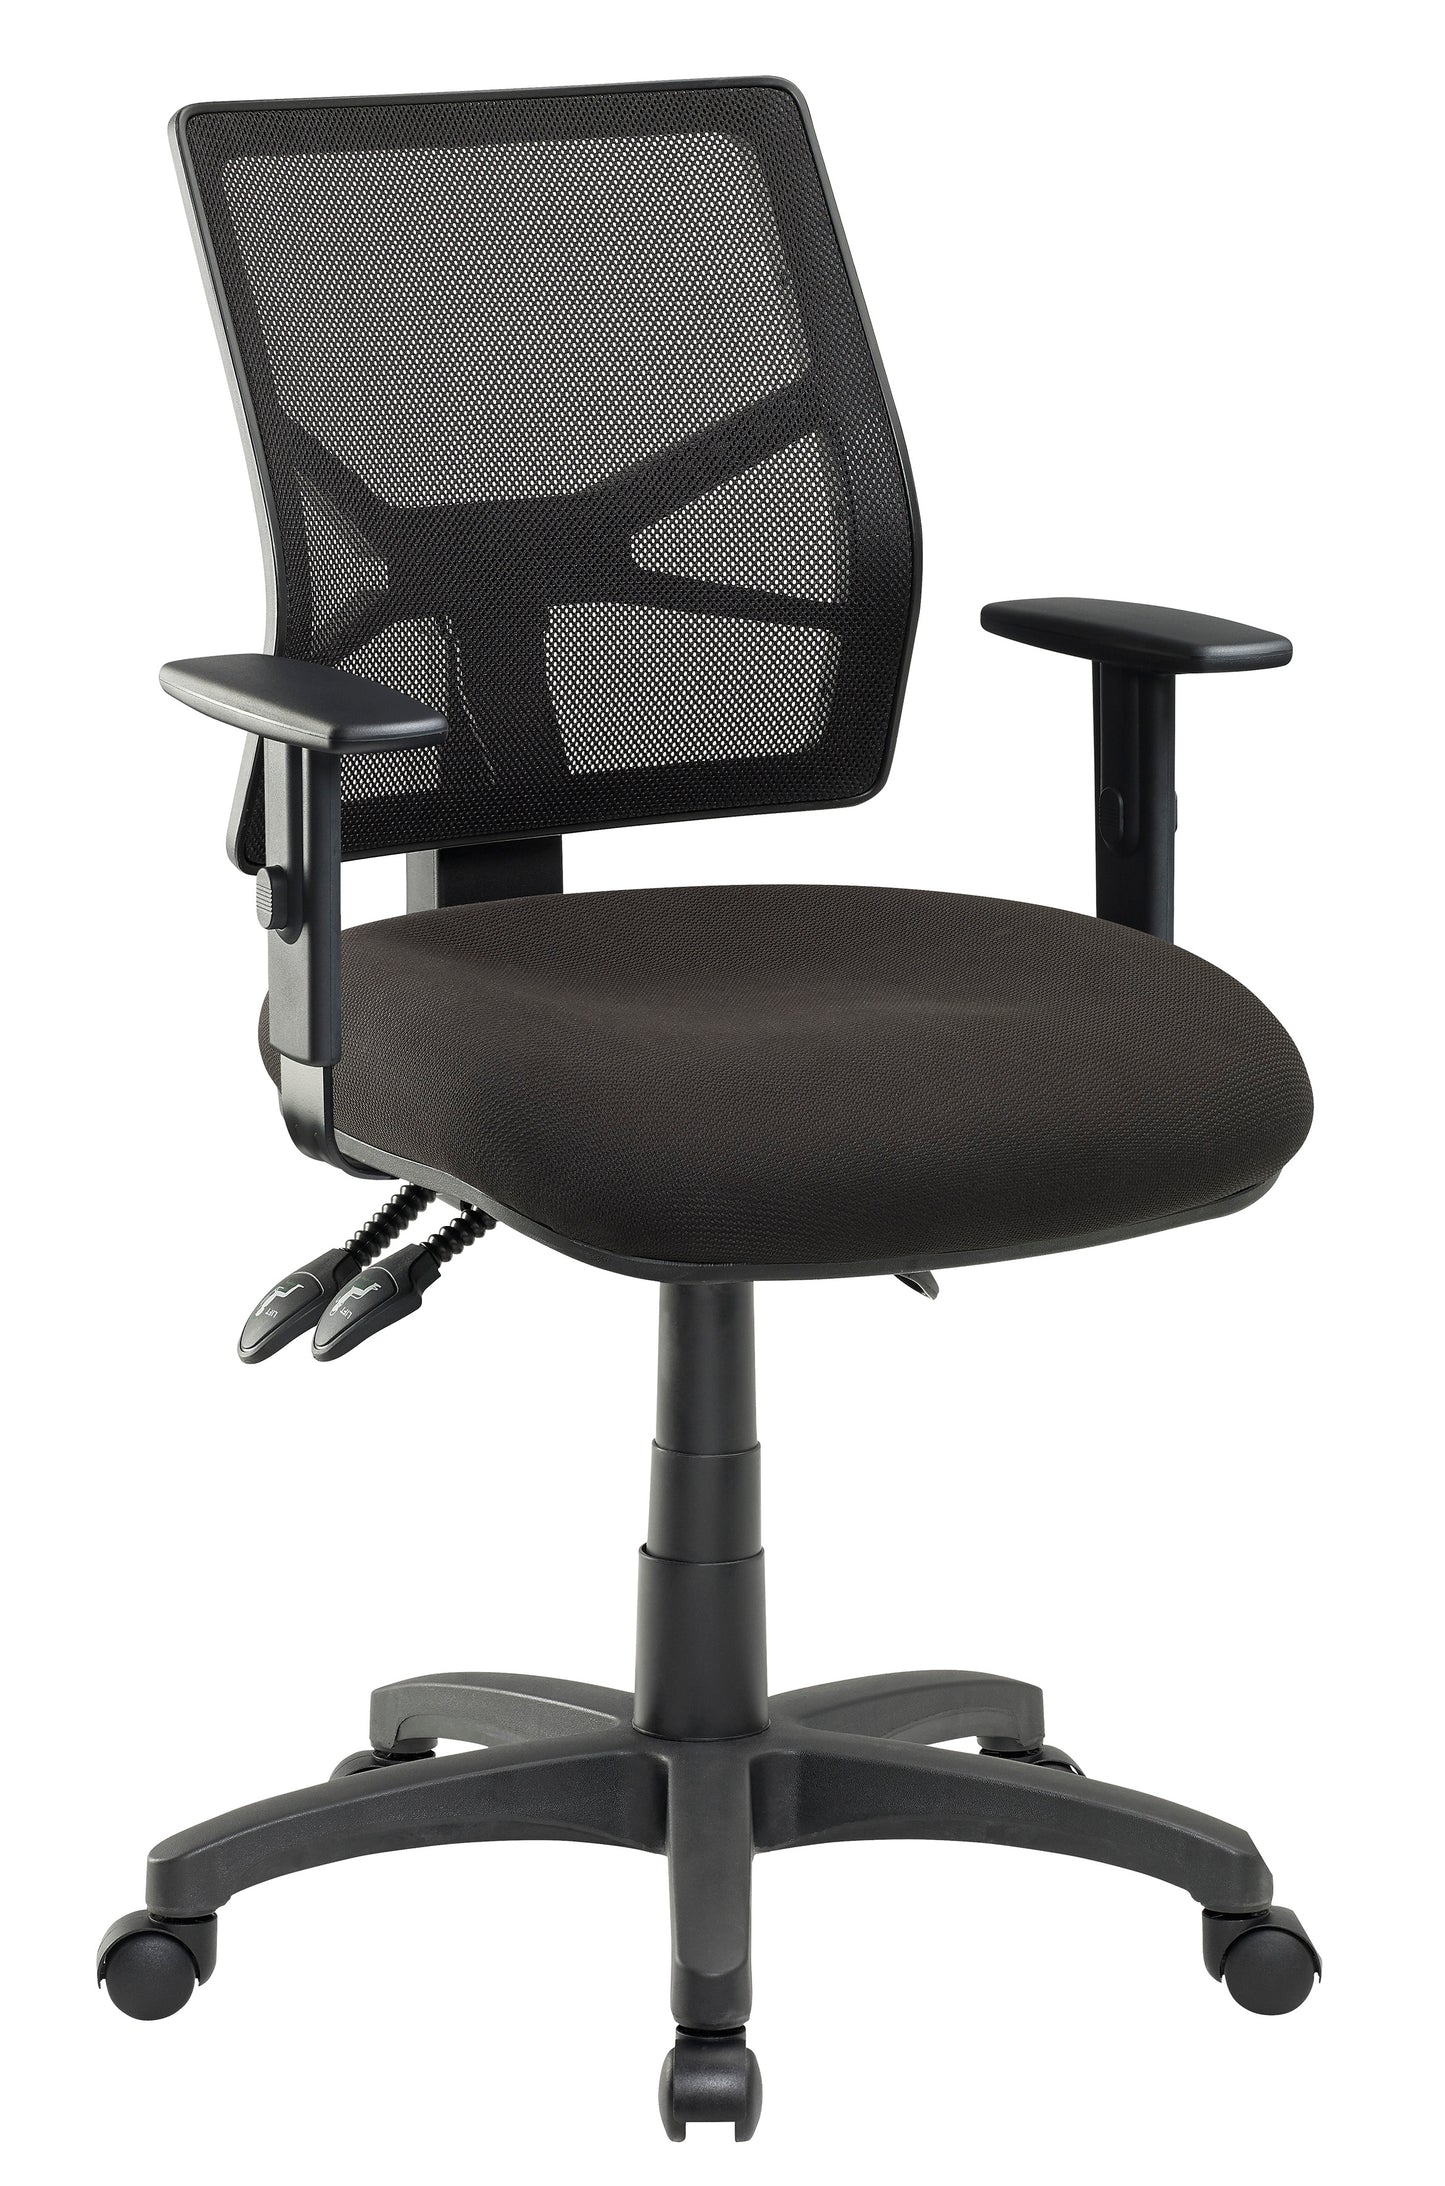 Chair - Advance Air with Arms